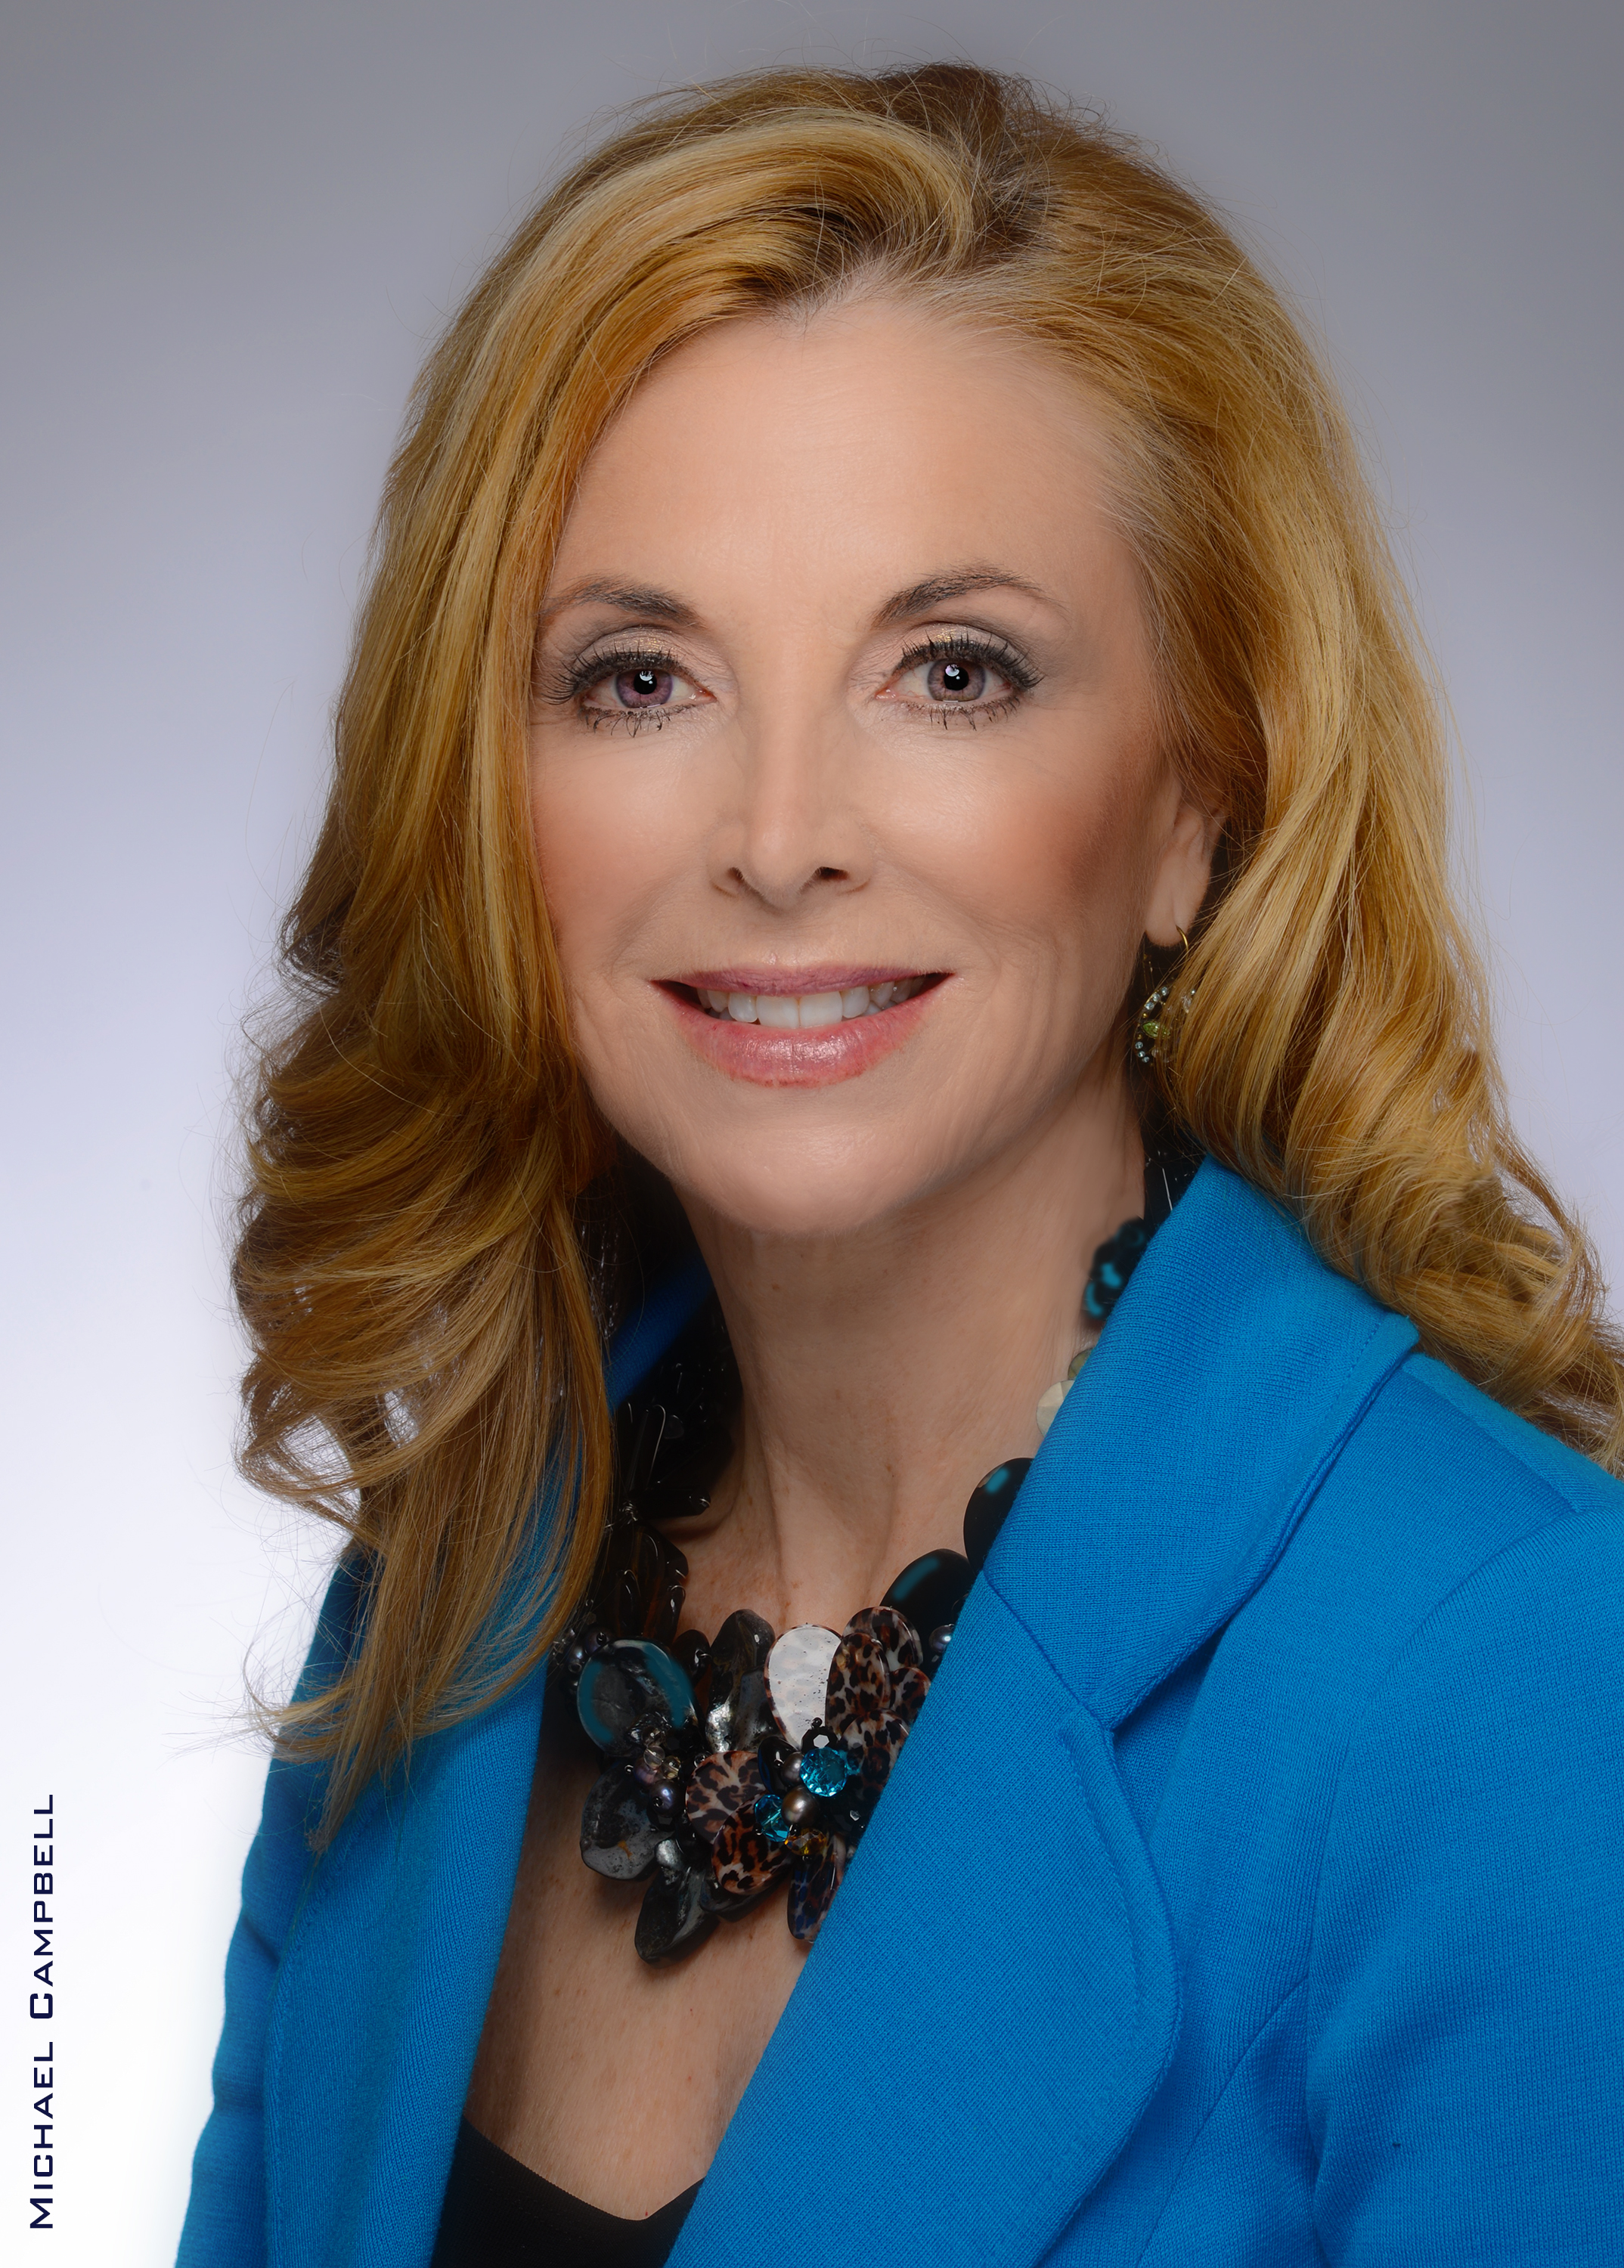 Vicky Carlson Resigns as CEO of LEAD San Diego | San Diego Business Journal